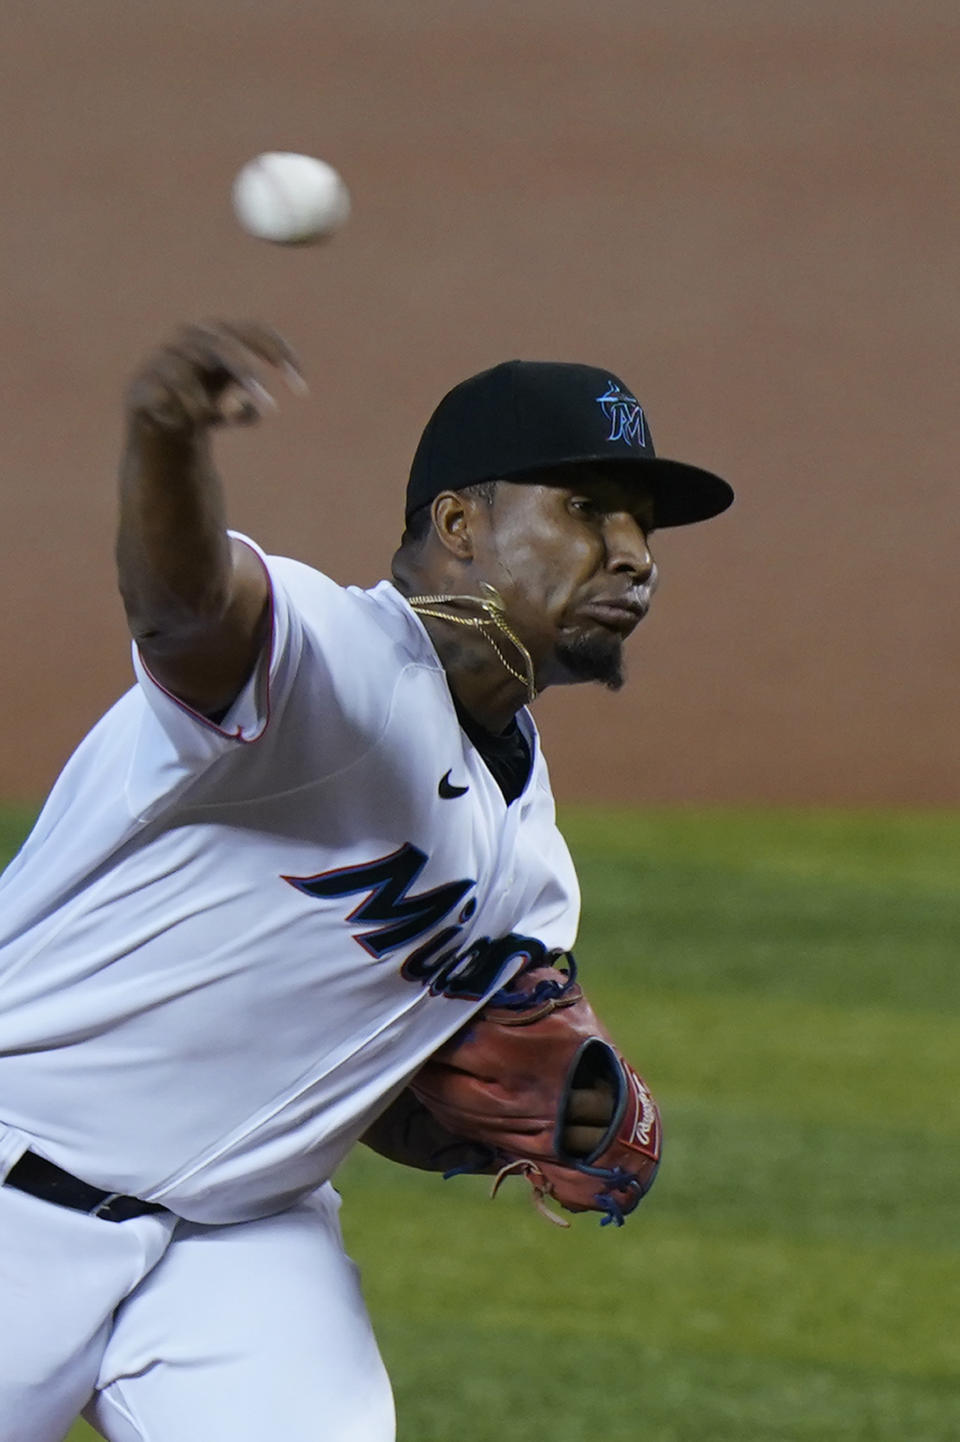 Miami Marlins' Sixto Sanchez pitches during the first inning of the first game of a baseball doubleheader against the Philadelphia Phillies, Sunday, Sept. 13, 2020, in Miami. (AP Photo/Wilfredo Lee)